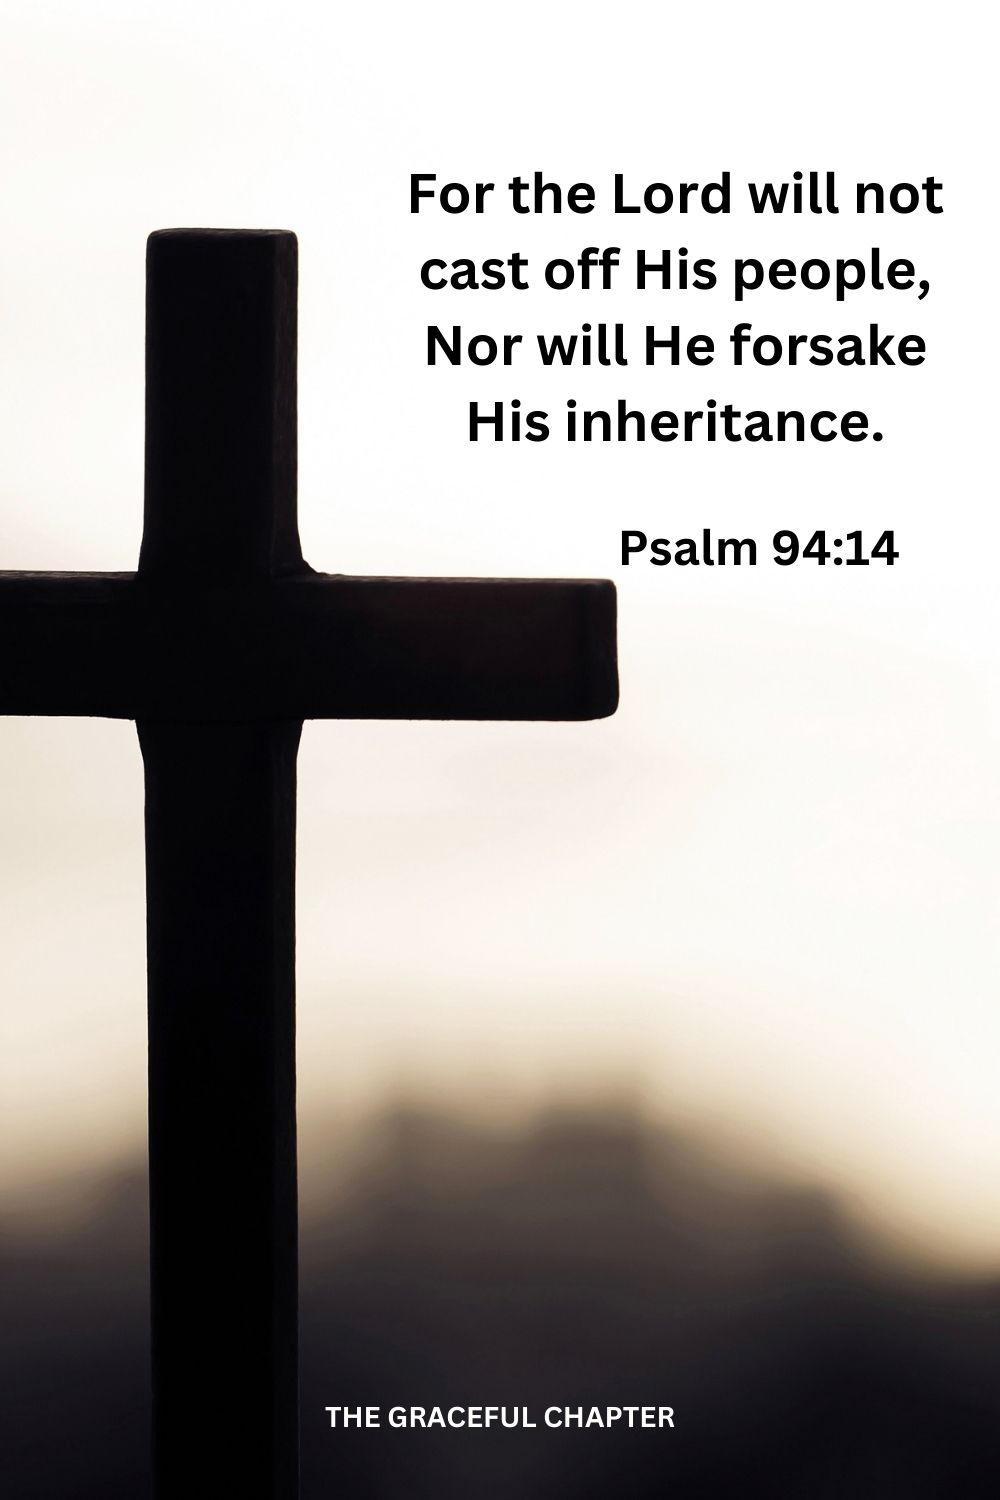 For the Lord will not cast off His people, Nor will He forsake His inheritance. Psalm 94:14